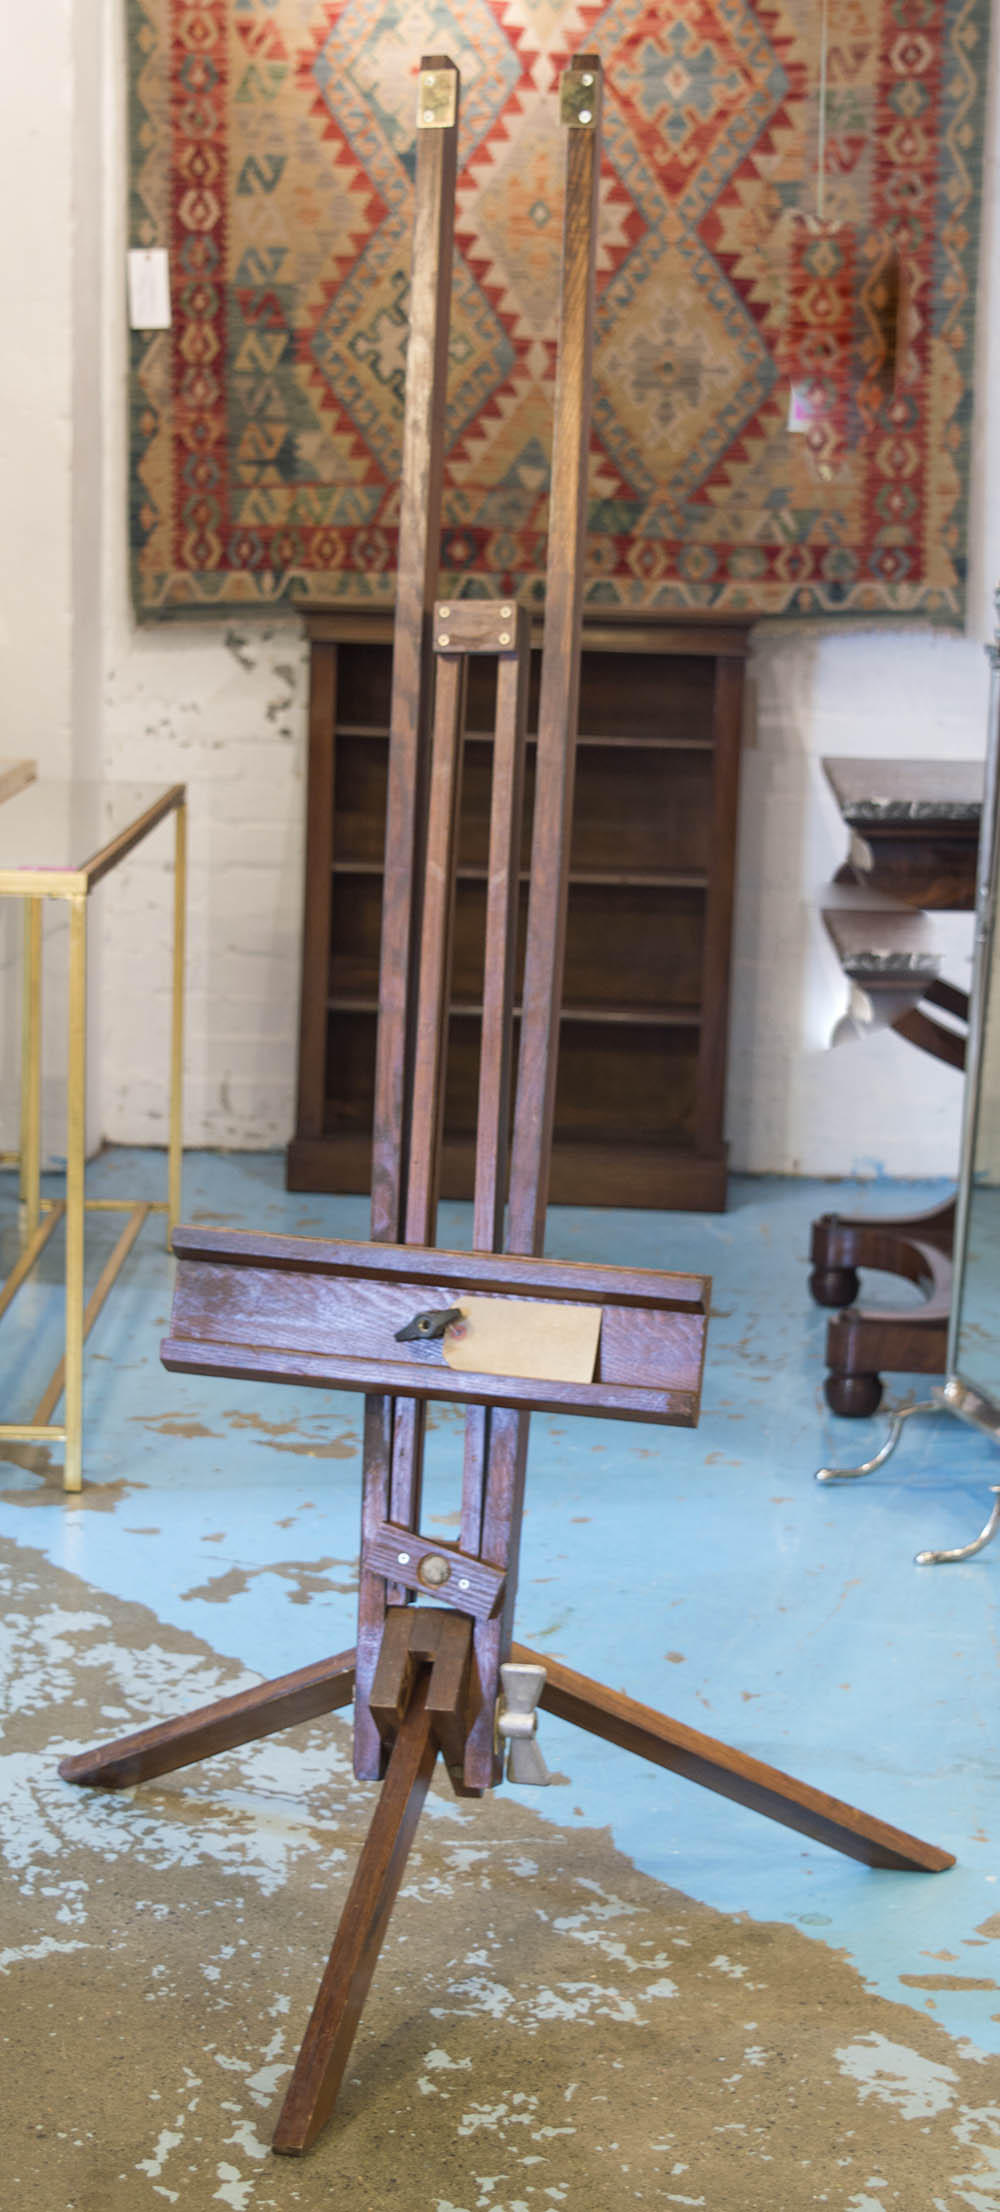 ARTISTS EASEL, 20th century polished wood and adjustable, approx. 190cm H.